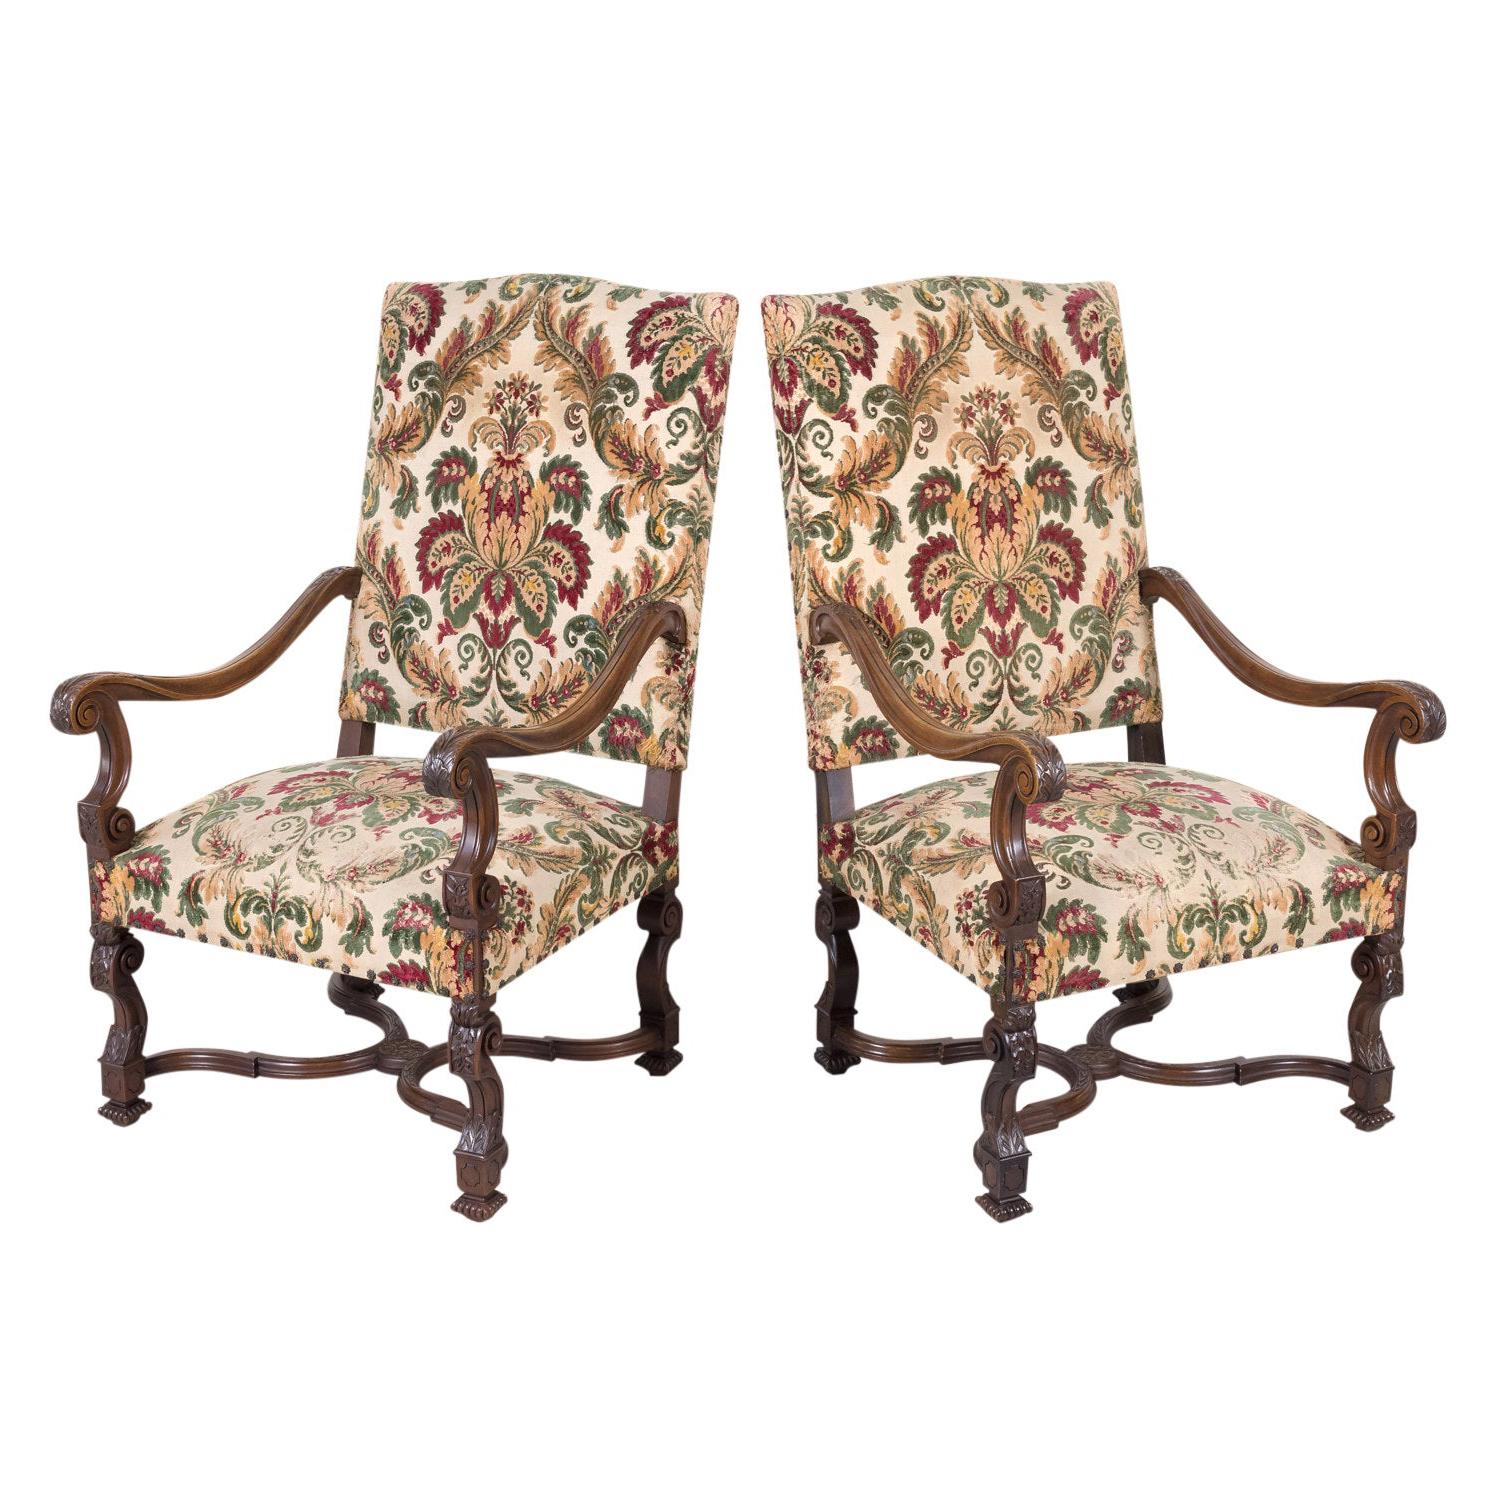 Pair of 19th Century French Louis XIV Style Carved Walnut Fauteuils